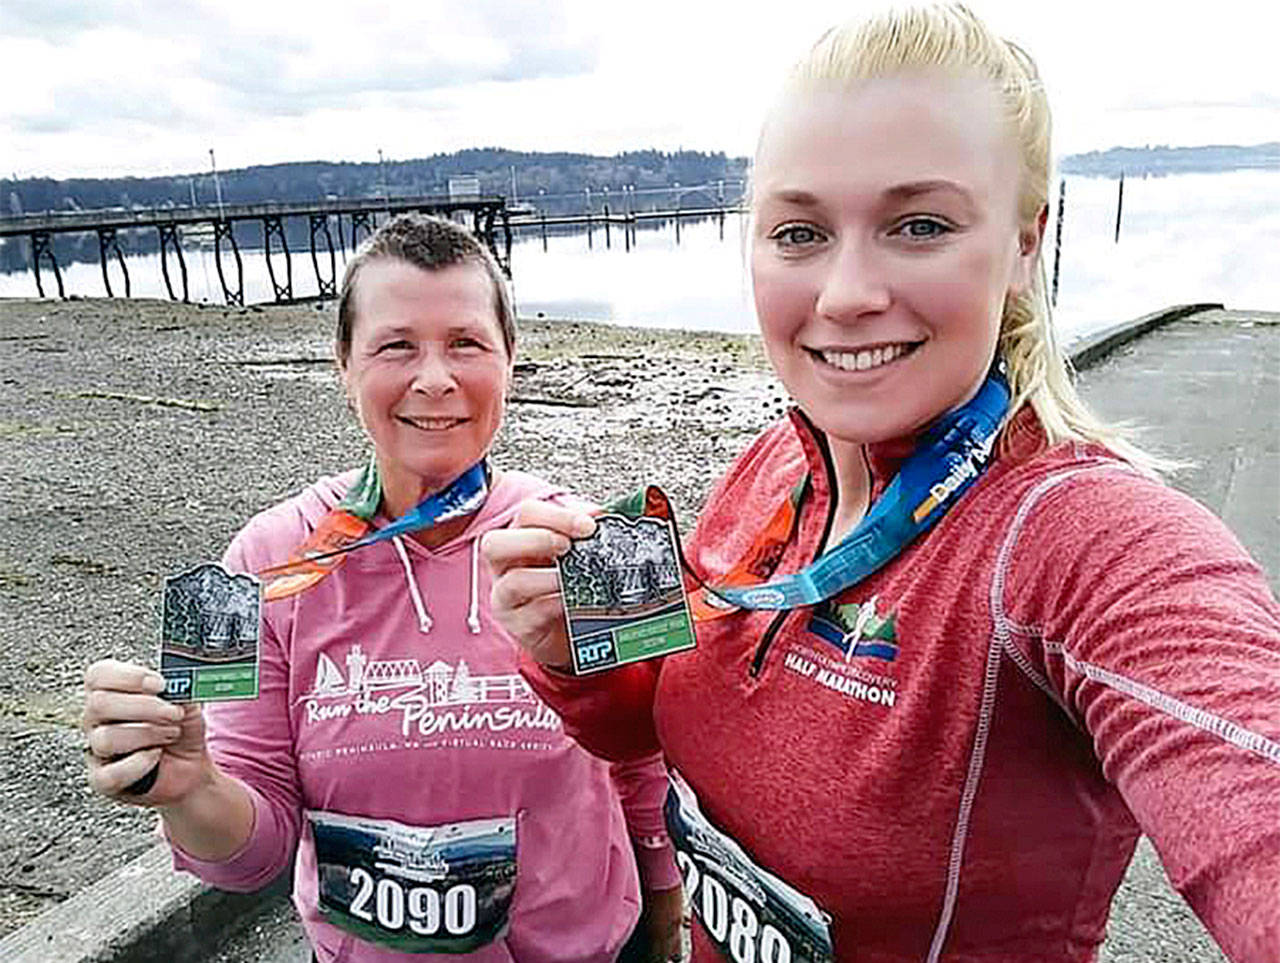 Mother and daughter Janet and Jessica Ouellet competed in the Run the Peninsula’s virtual 10K Railroad Run together in Seabeck. (Photo courtesy of Run the Peninsula)